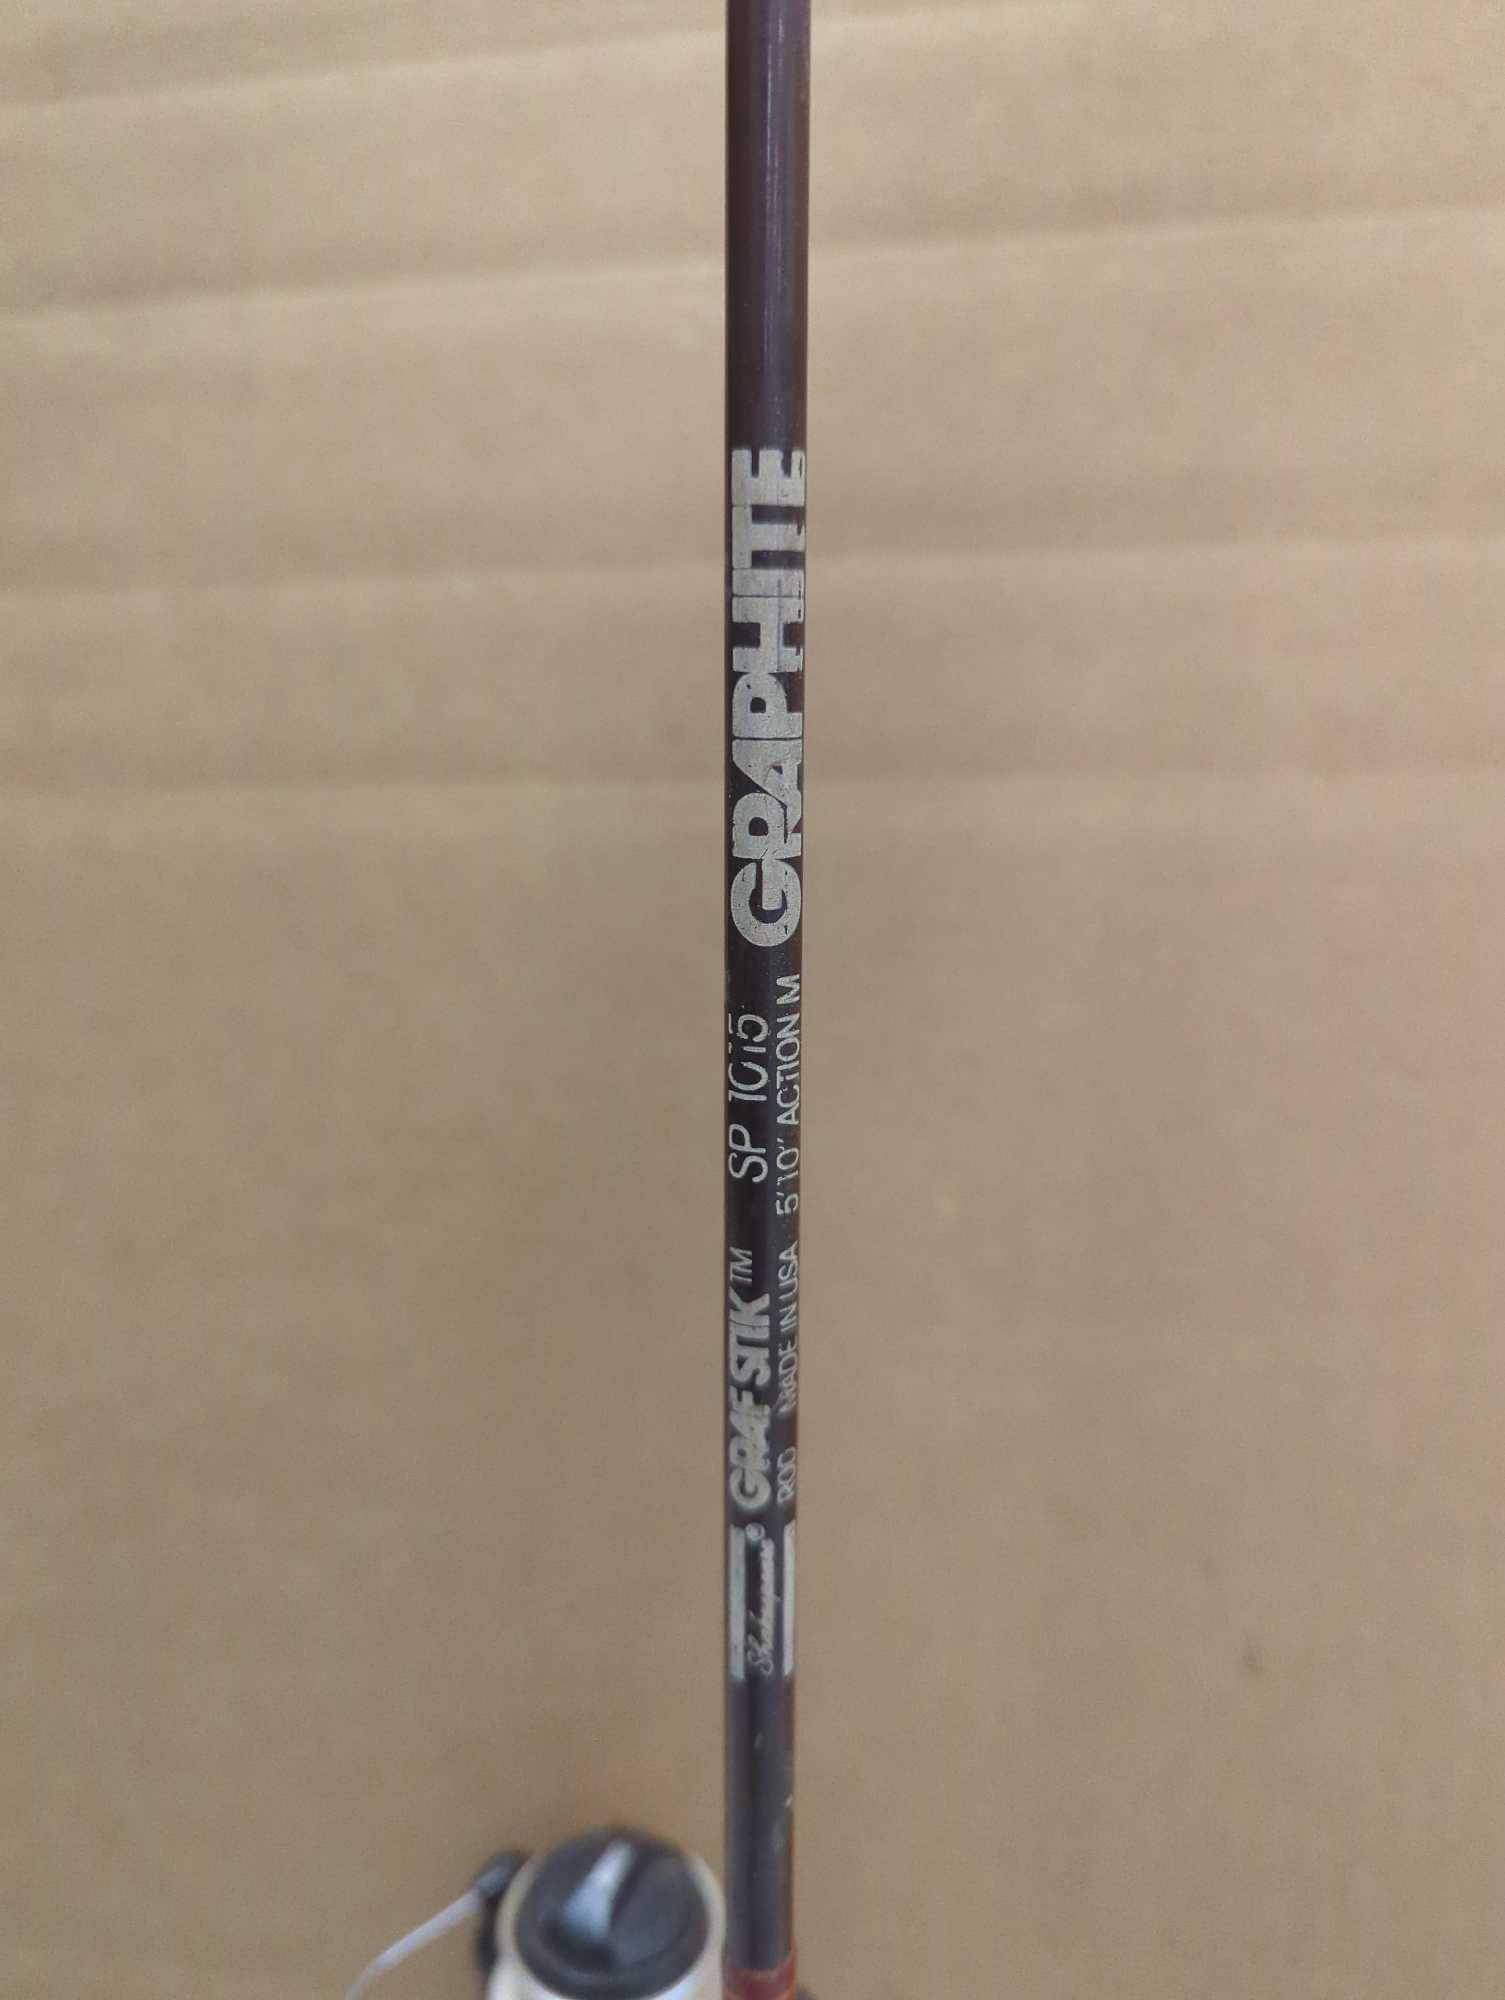 Shakespeare 5'10" Graf Stik Graphite Rod, medium action Model # SP 1015 Comes as is shown in photos.